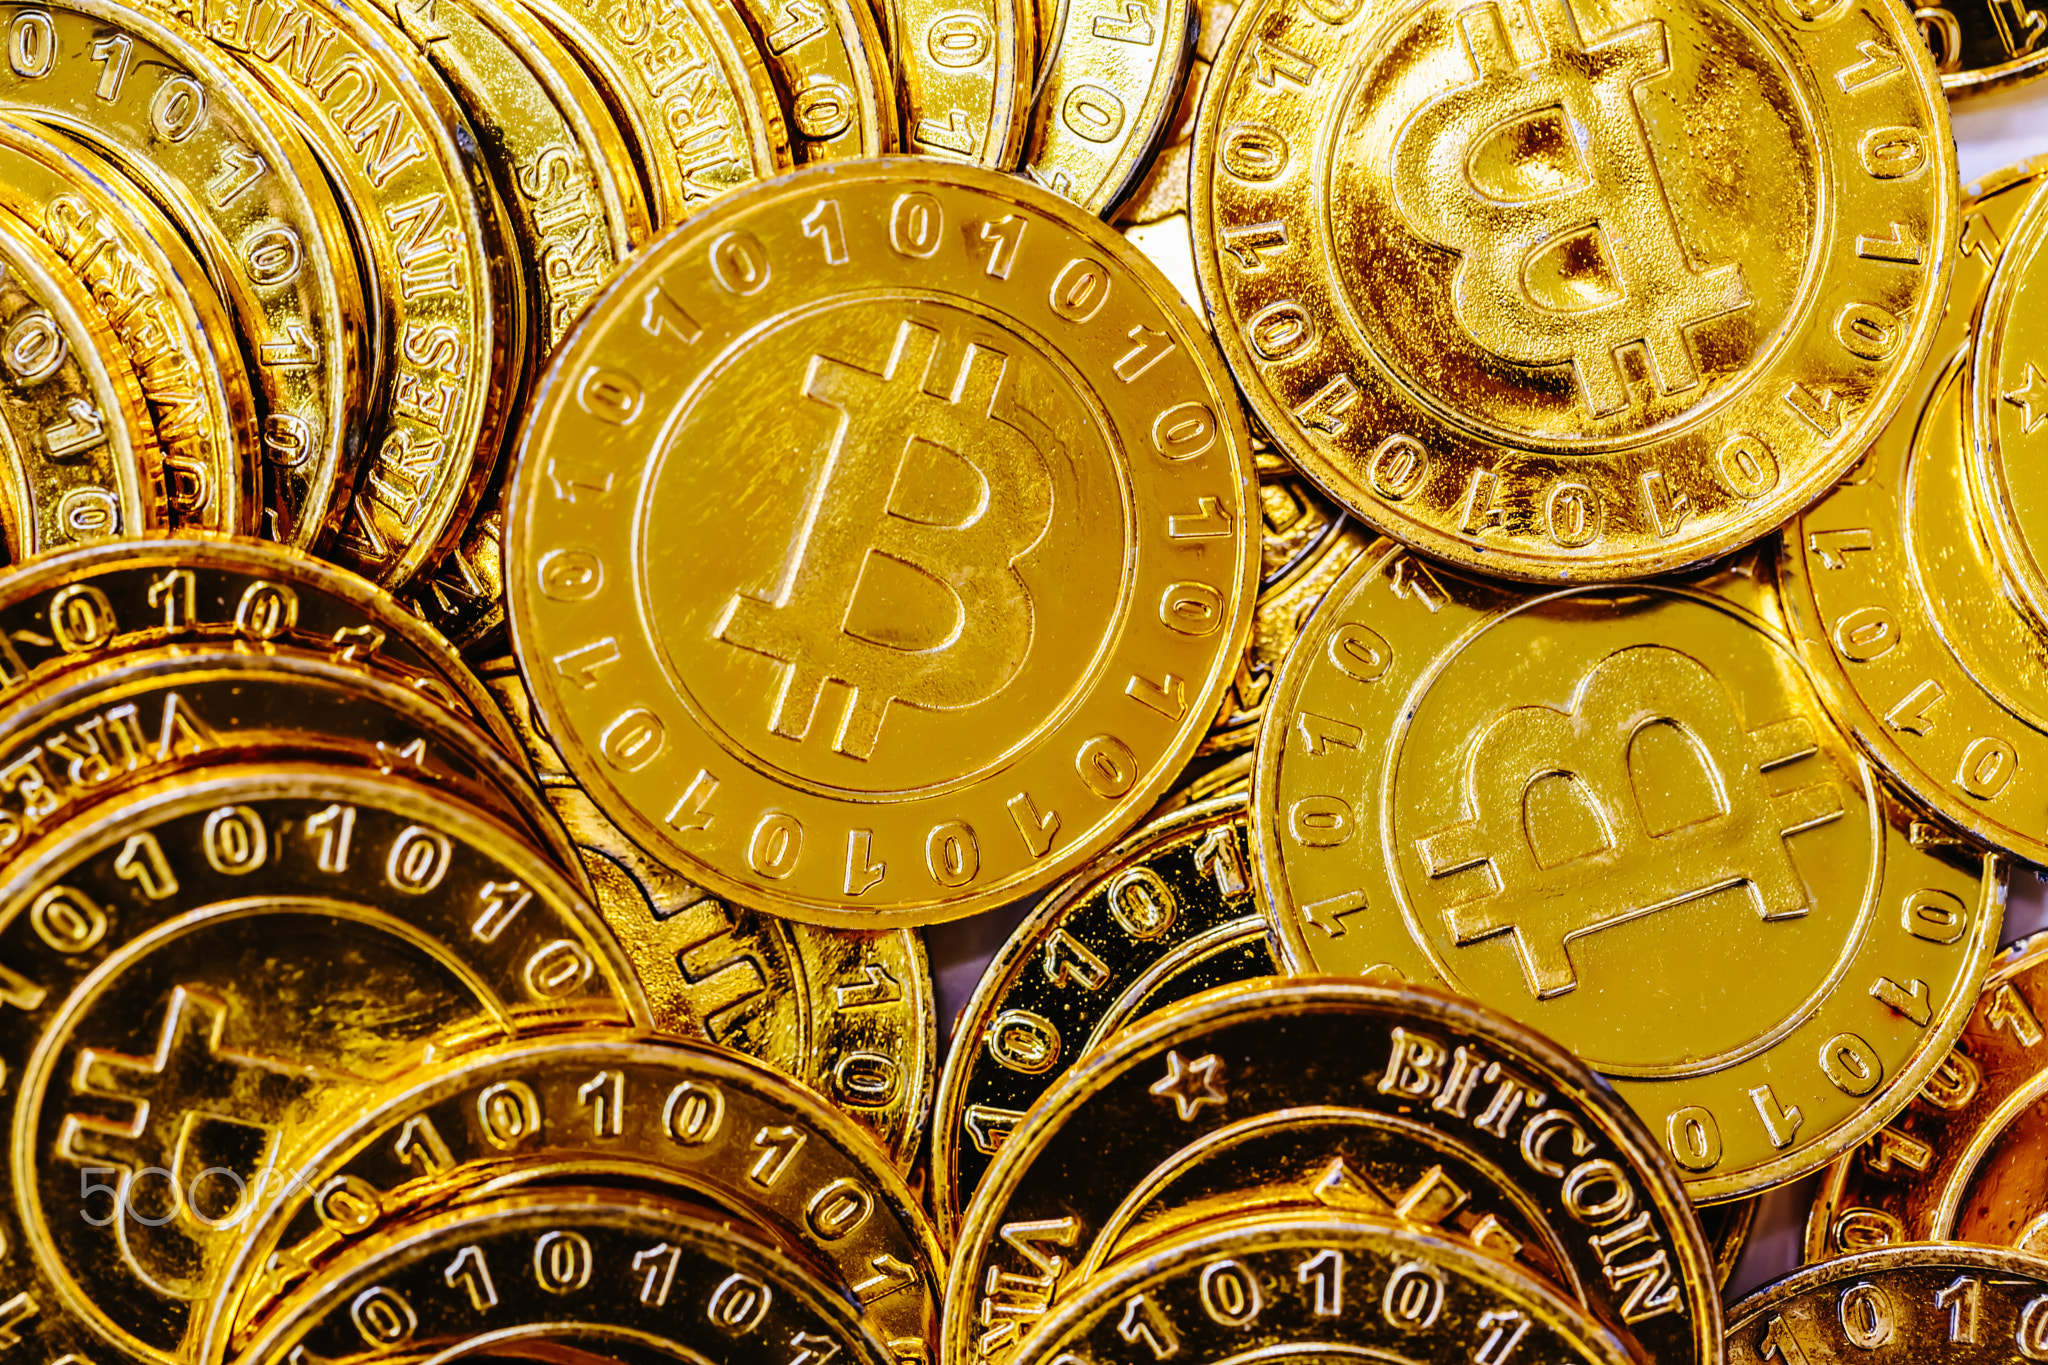 Pile of gold bitcoins